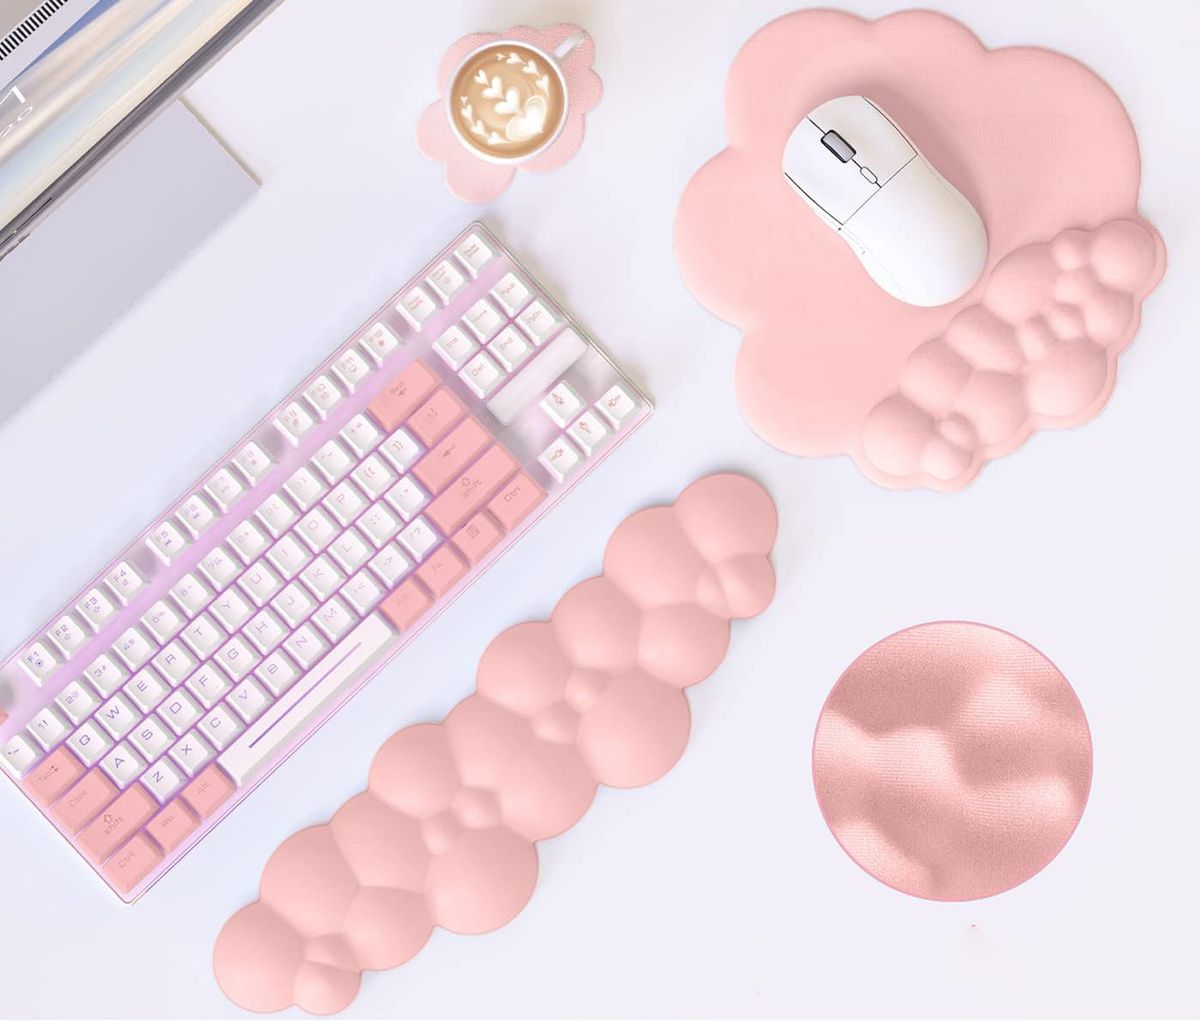 A stock photo of cloud-shaped desk accessories from Amazon.